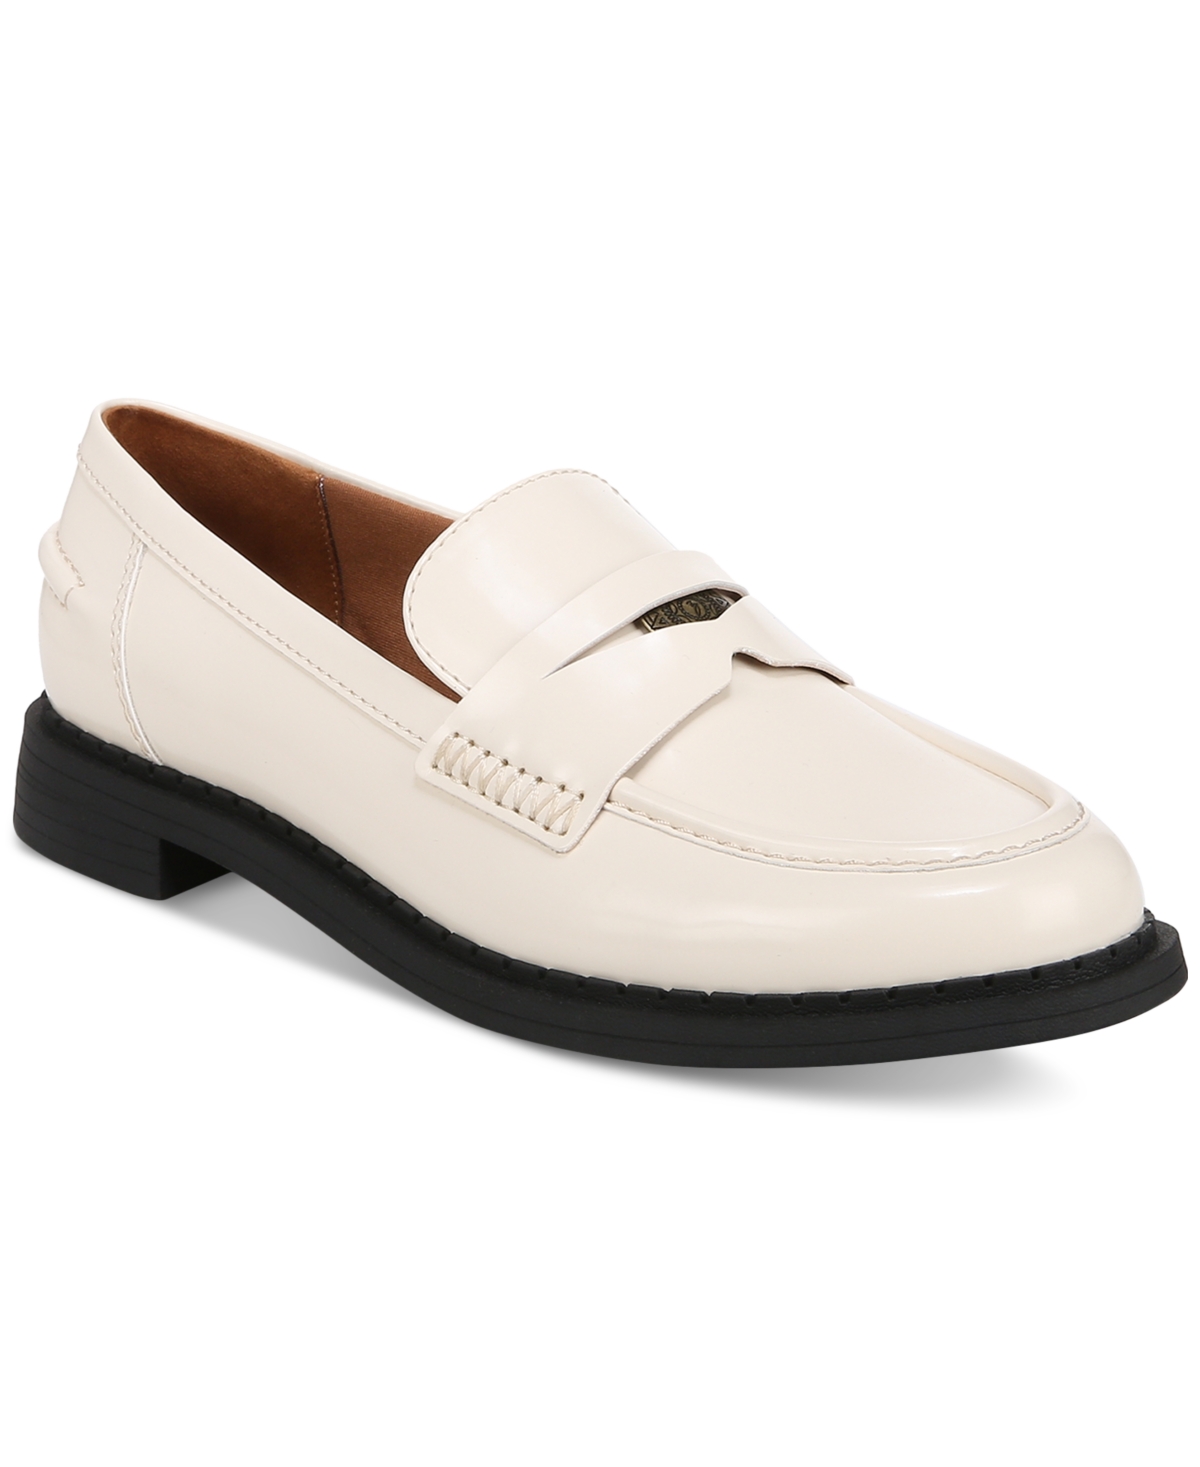 Women's Hunter Tailored Penny Loafers - Bone Patent